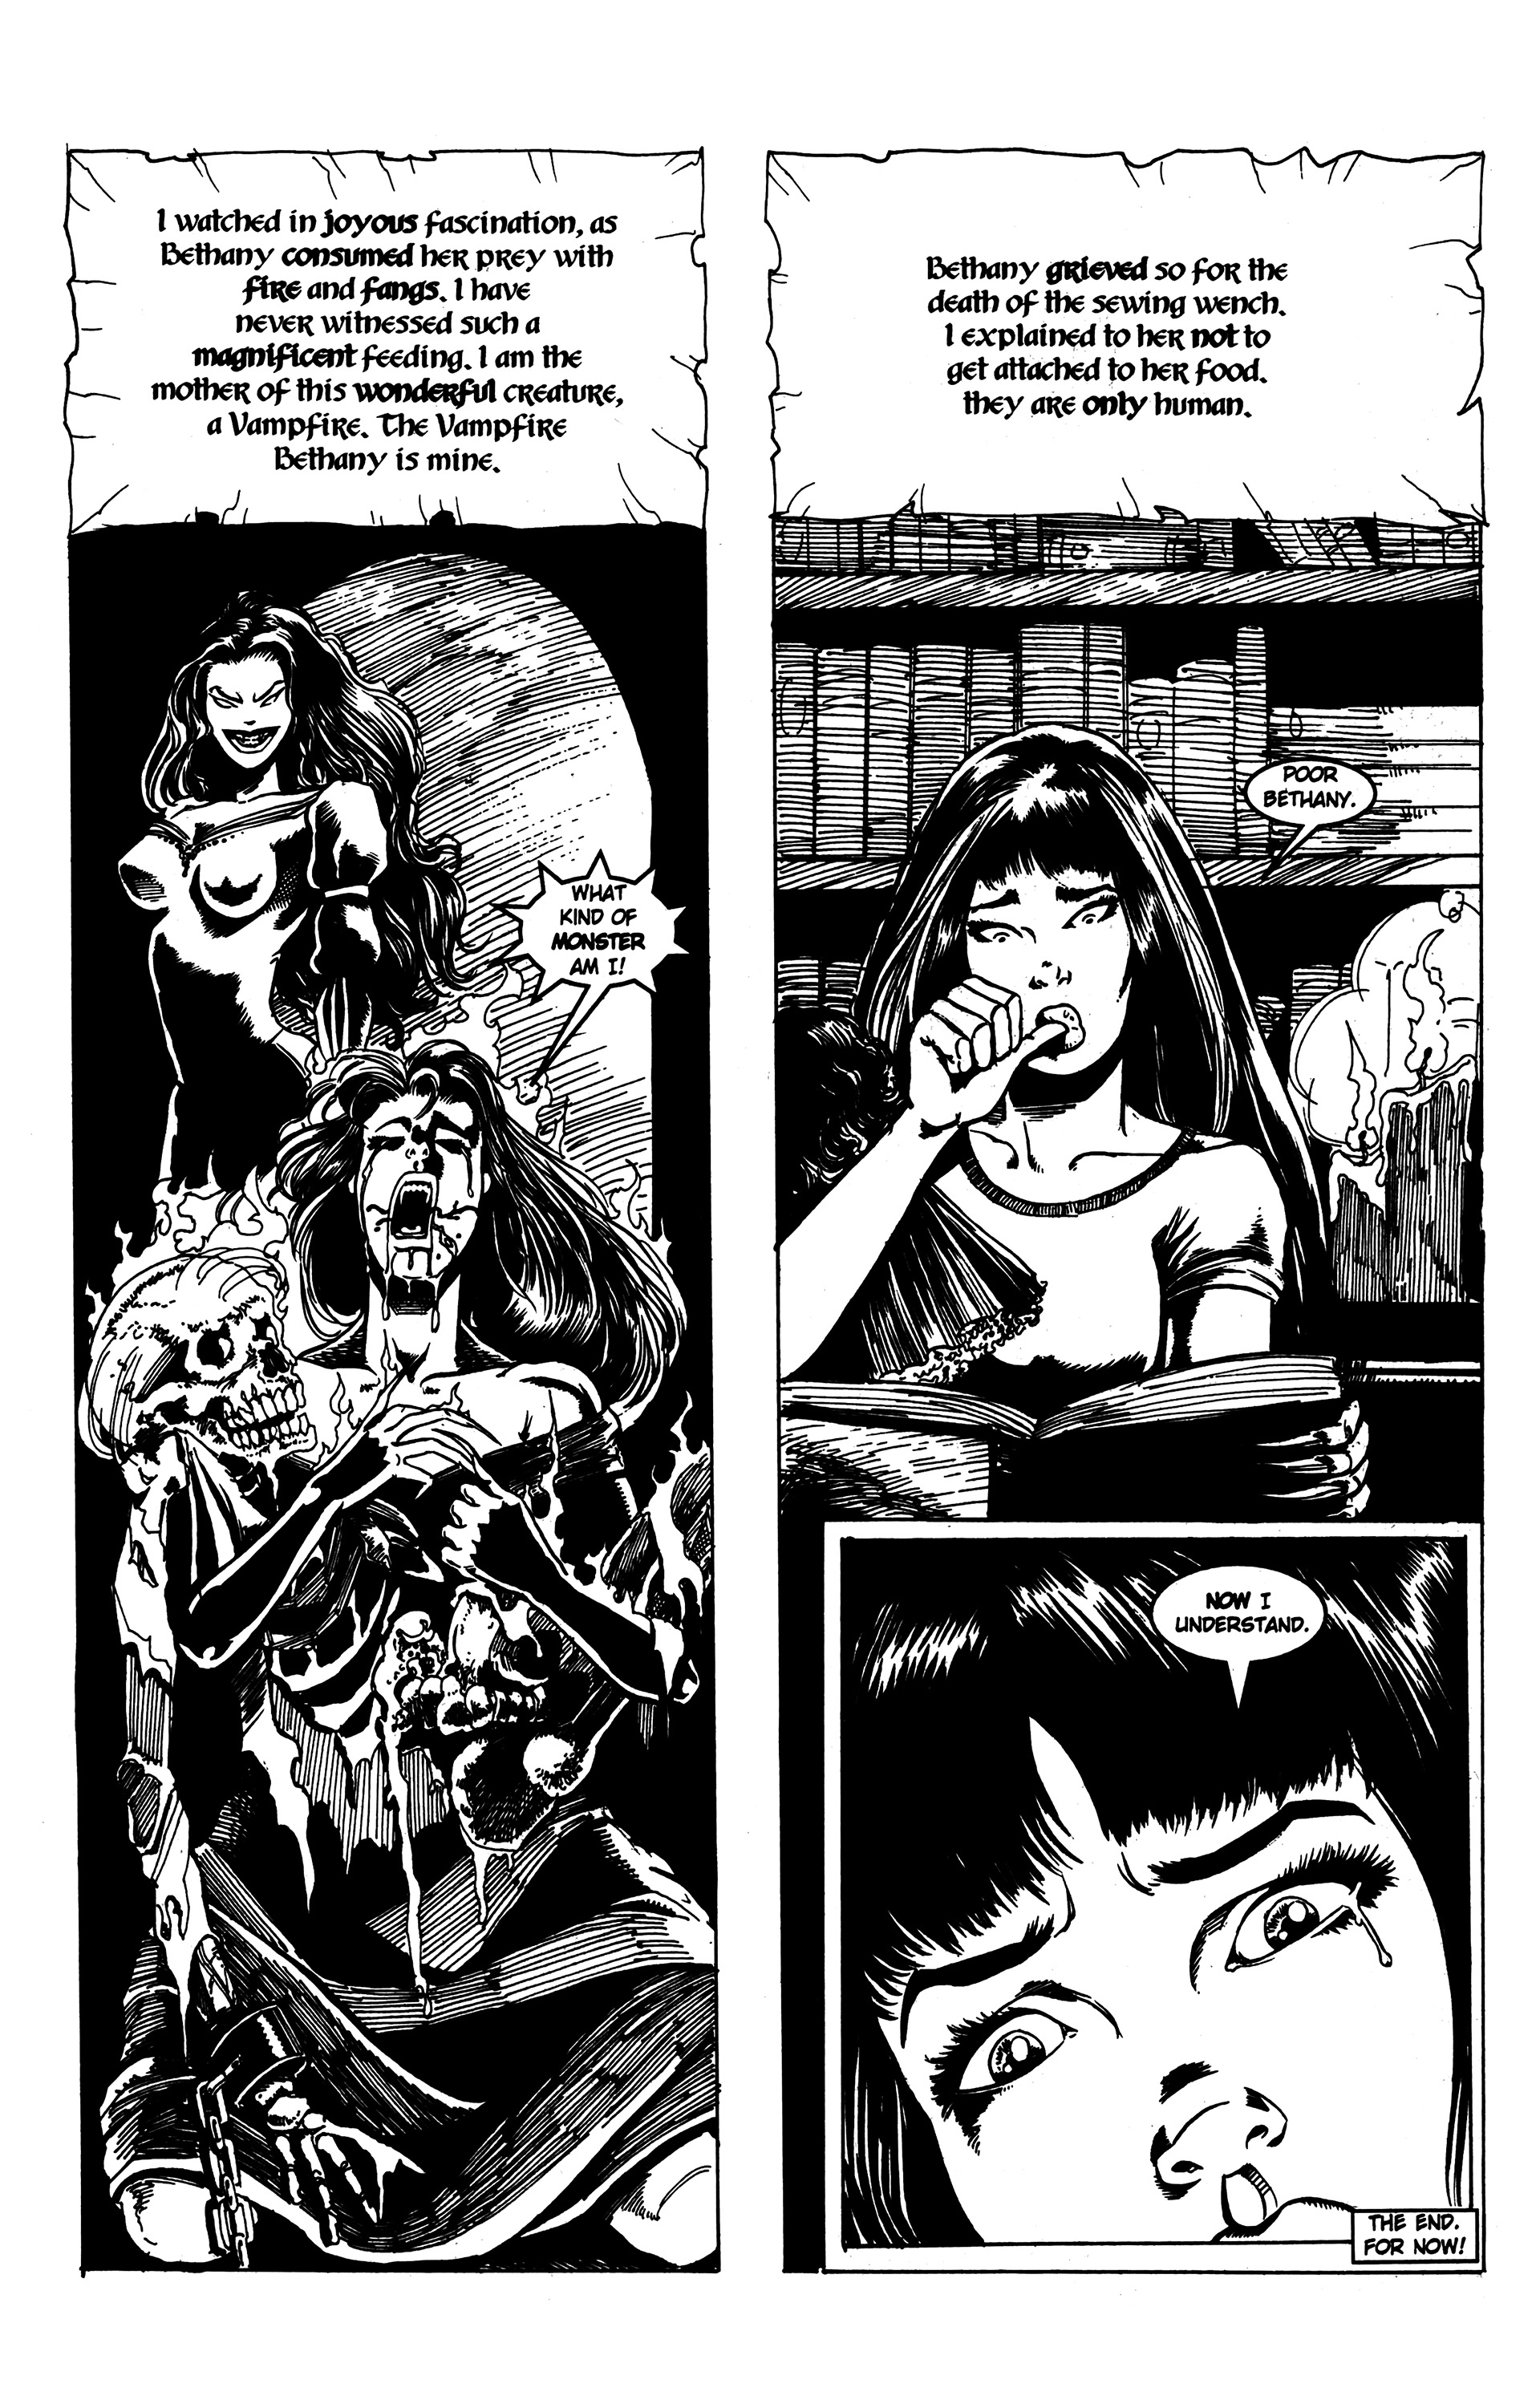 Read online Bethany the Vampfire comic -  Issue #0 - 24